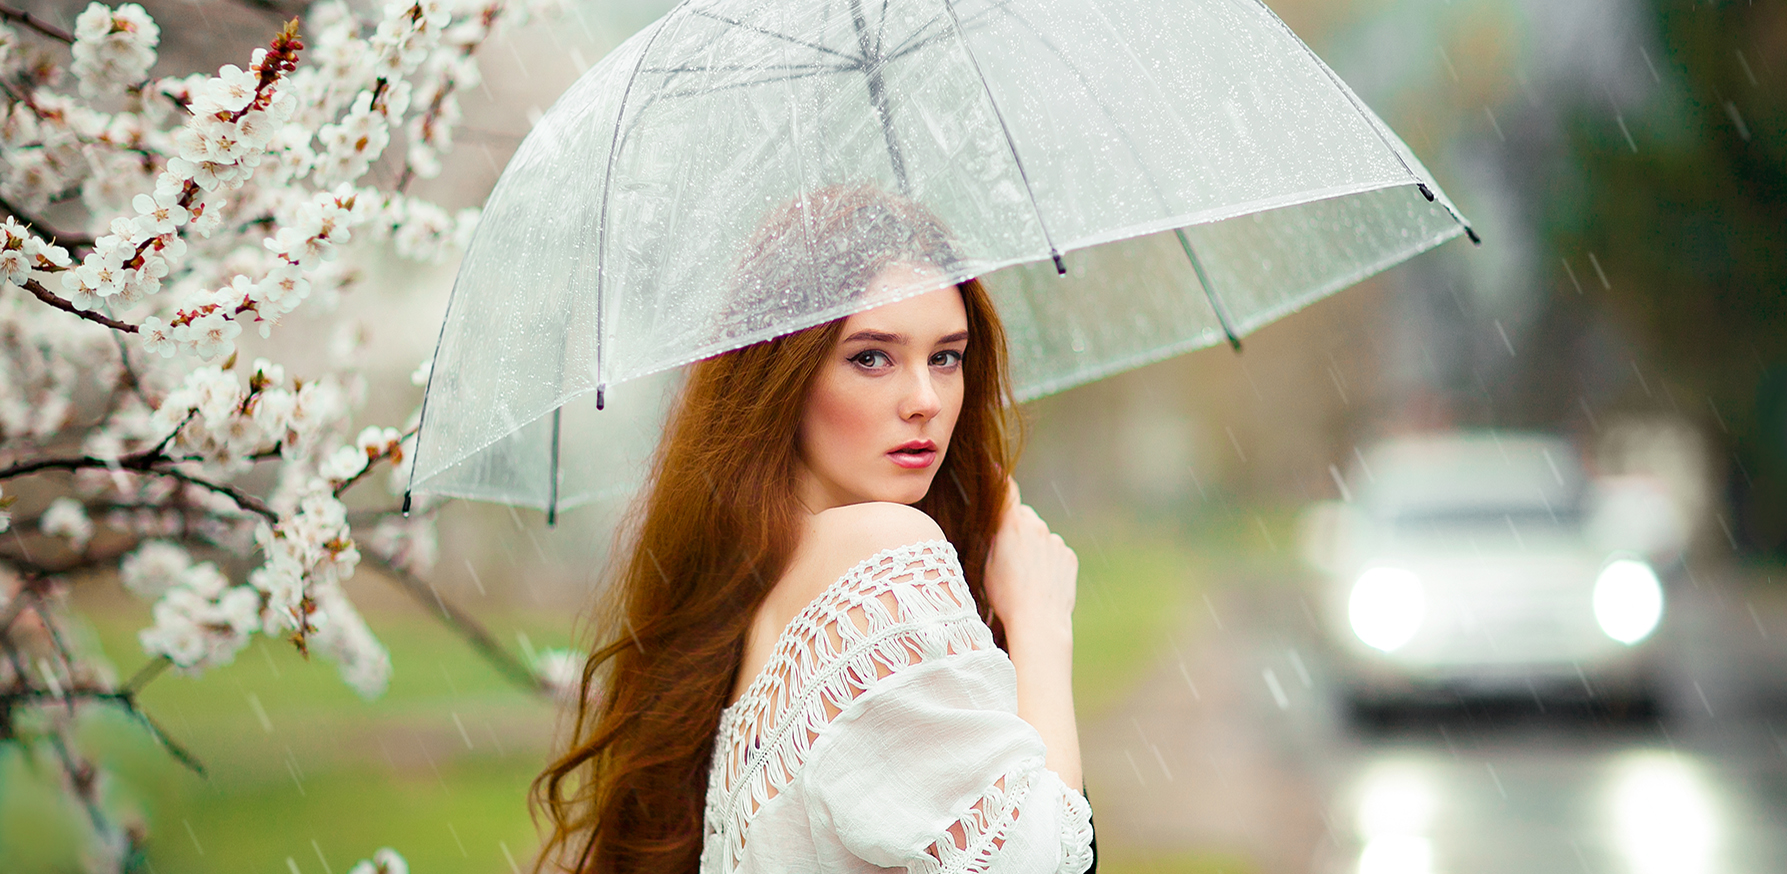 rainy-day-outfits-for-spring-woman-in-the-rain-holiday-umbrella-fashion-rain